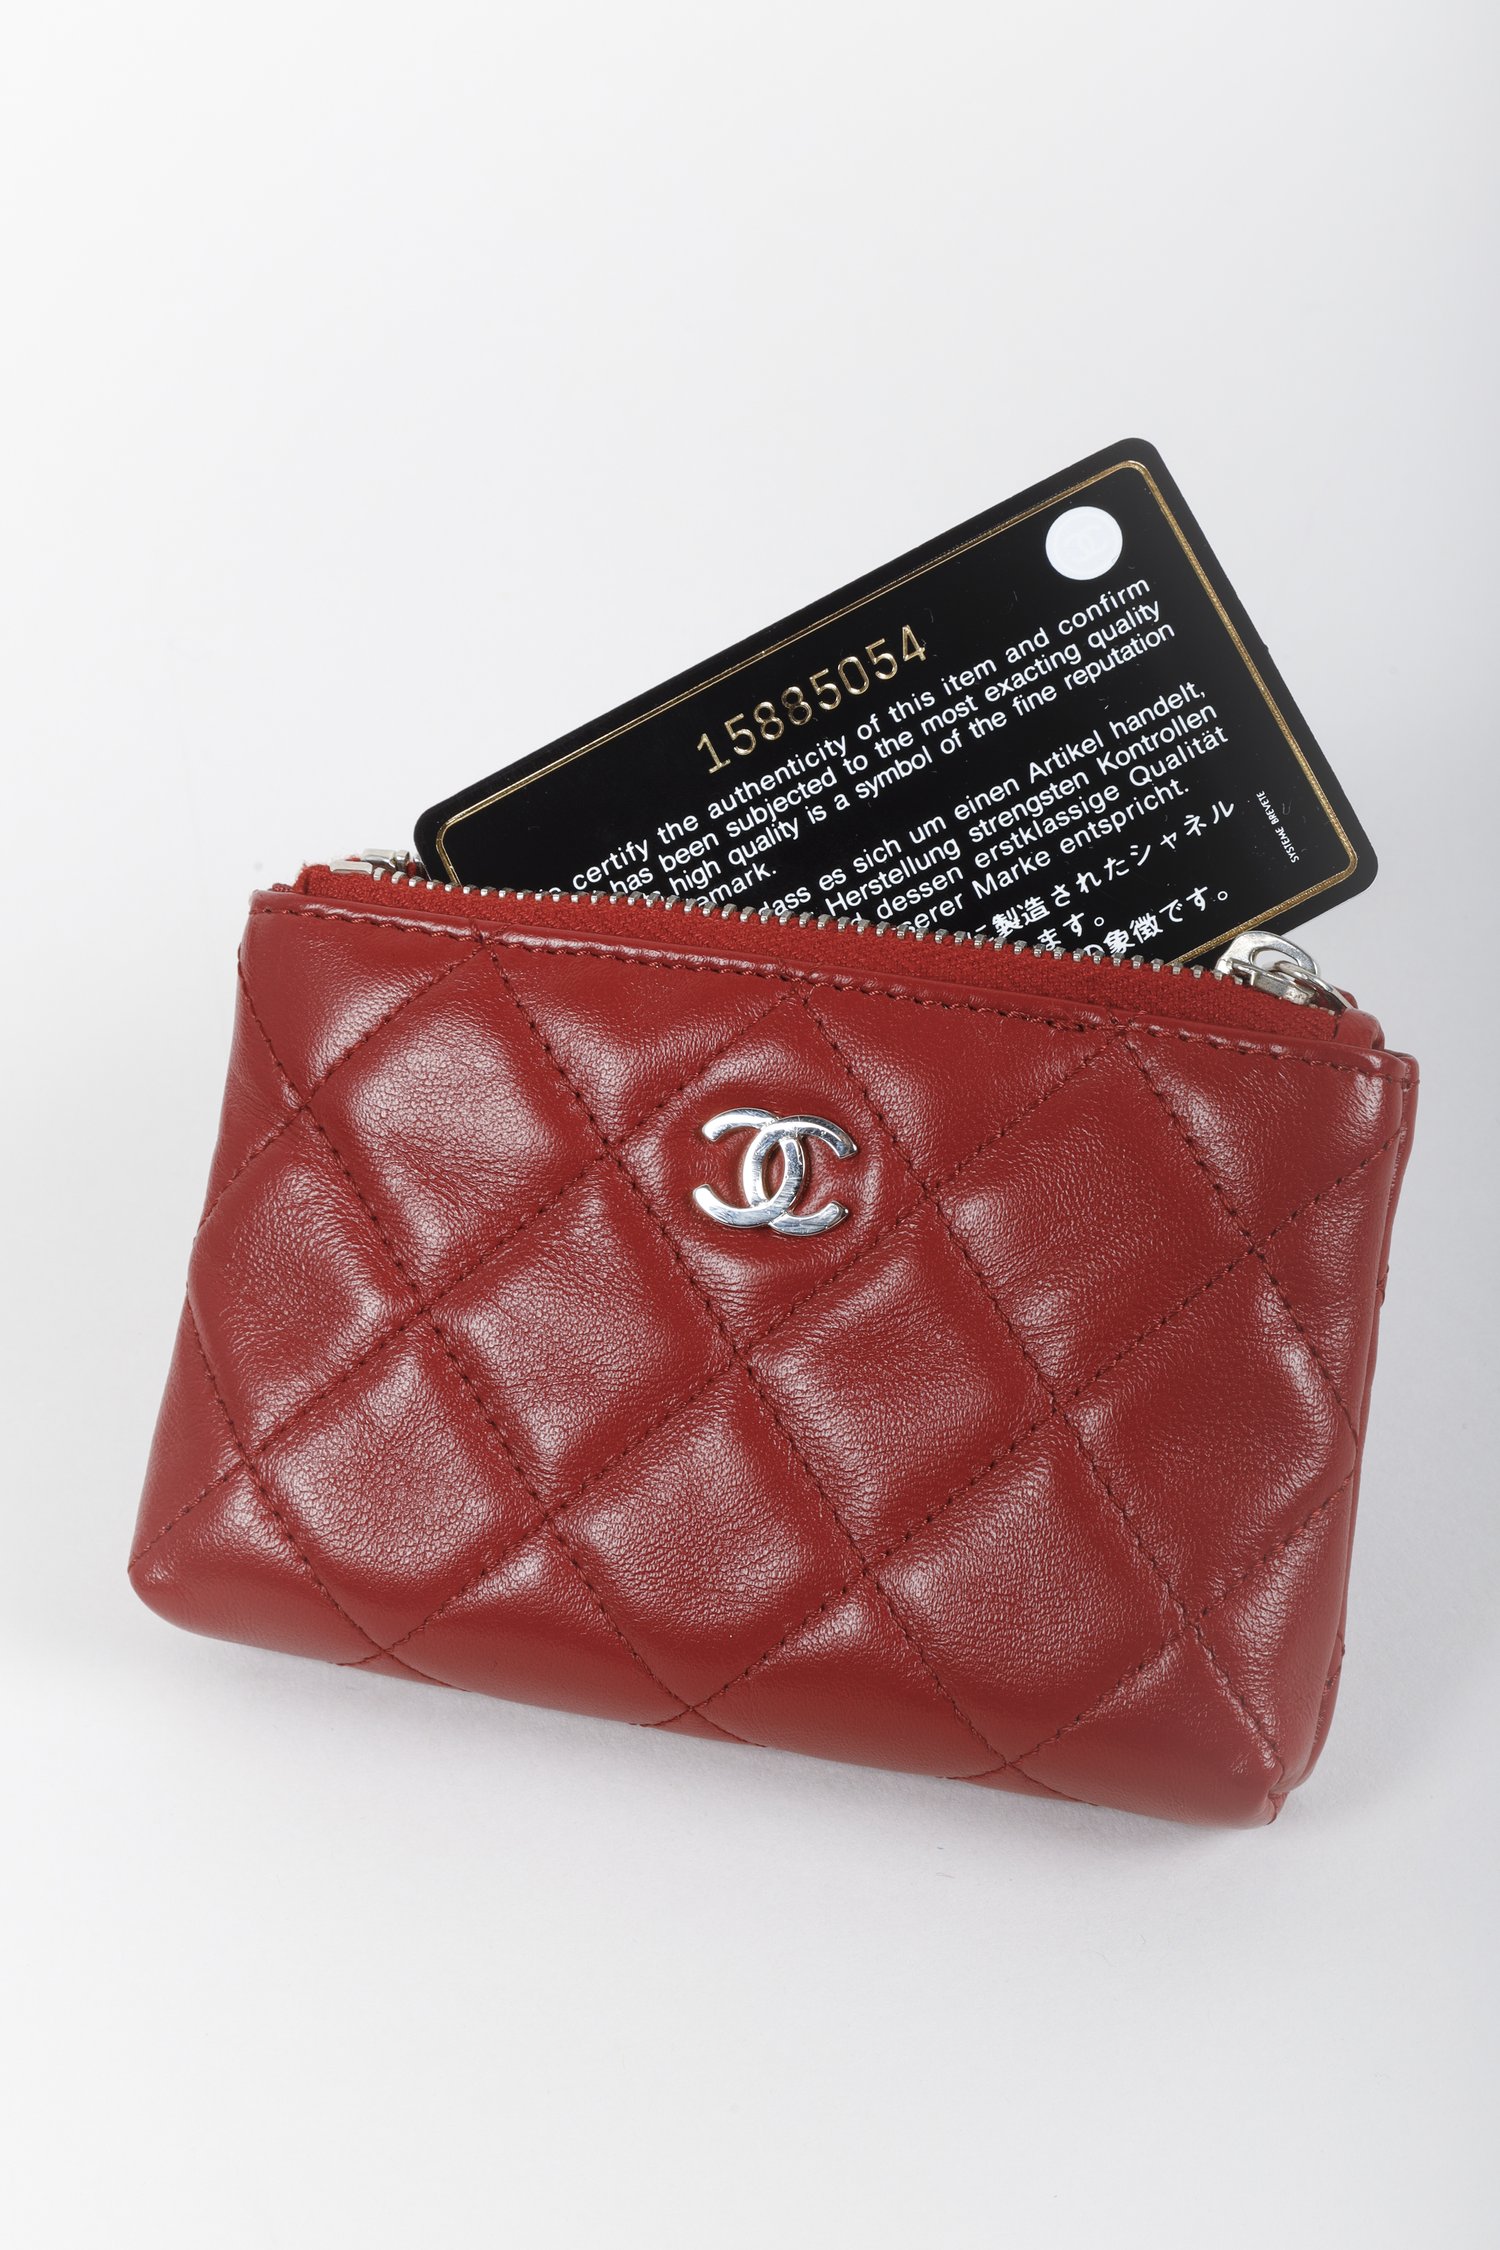 Chanel Red Lambskin Quilted Key/Card Pouch — BLOGGER ARMOIRE